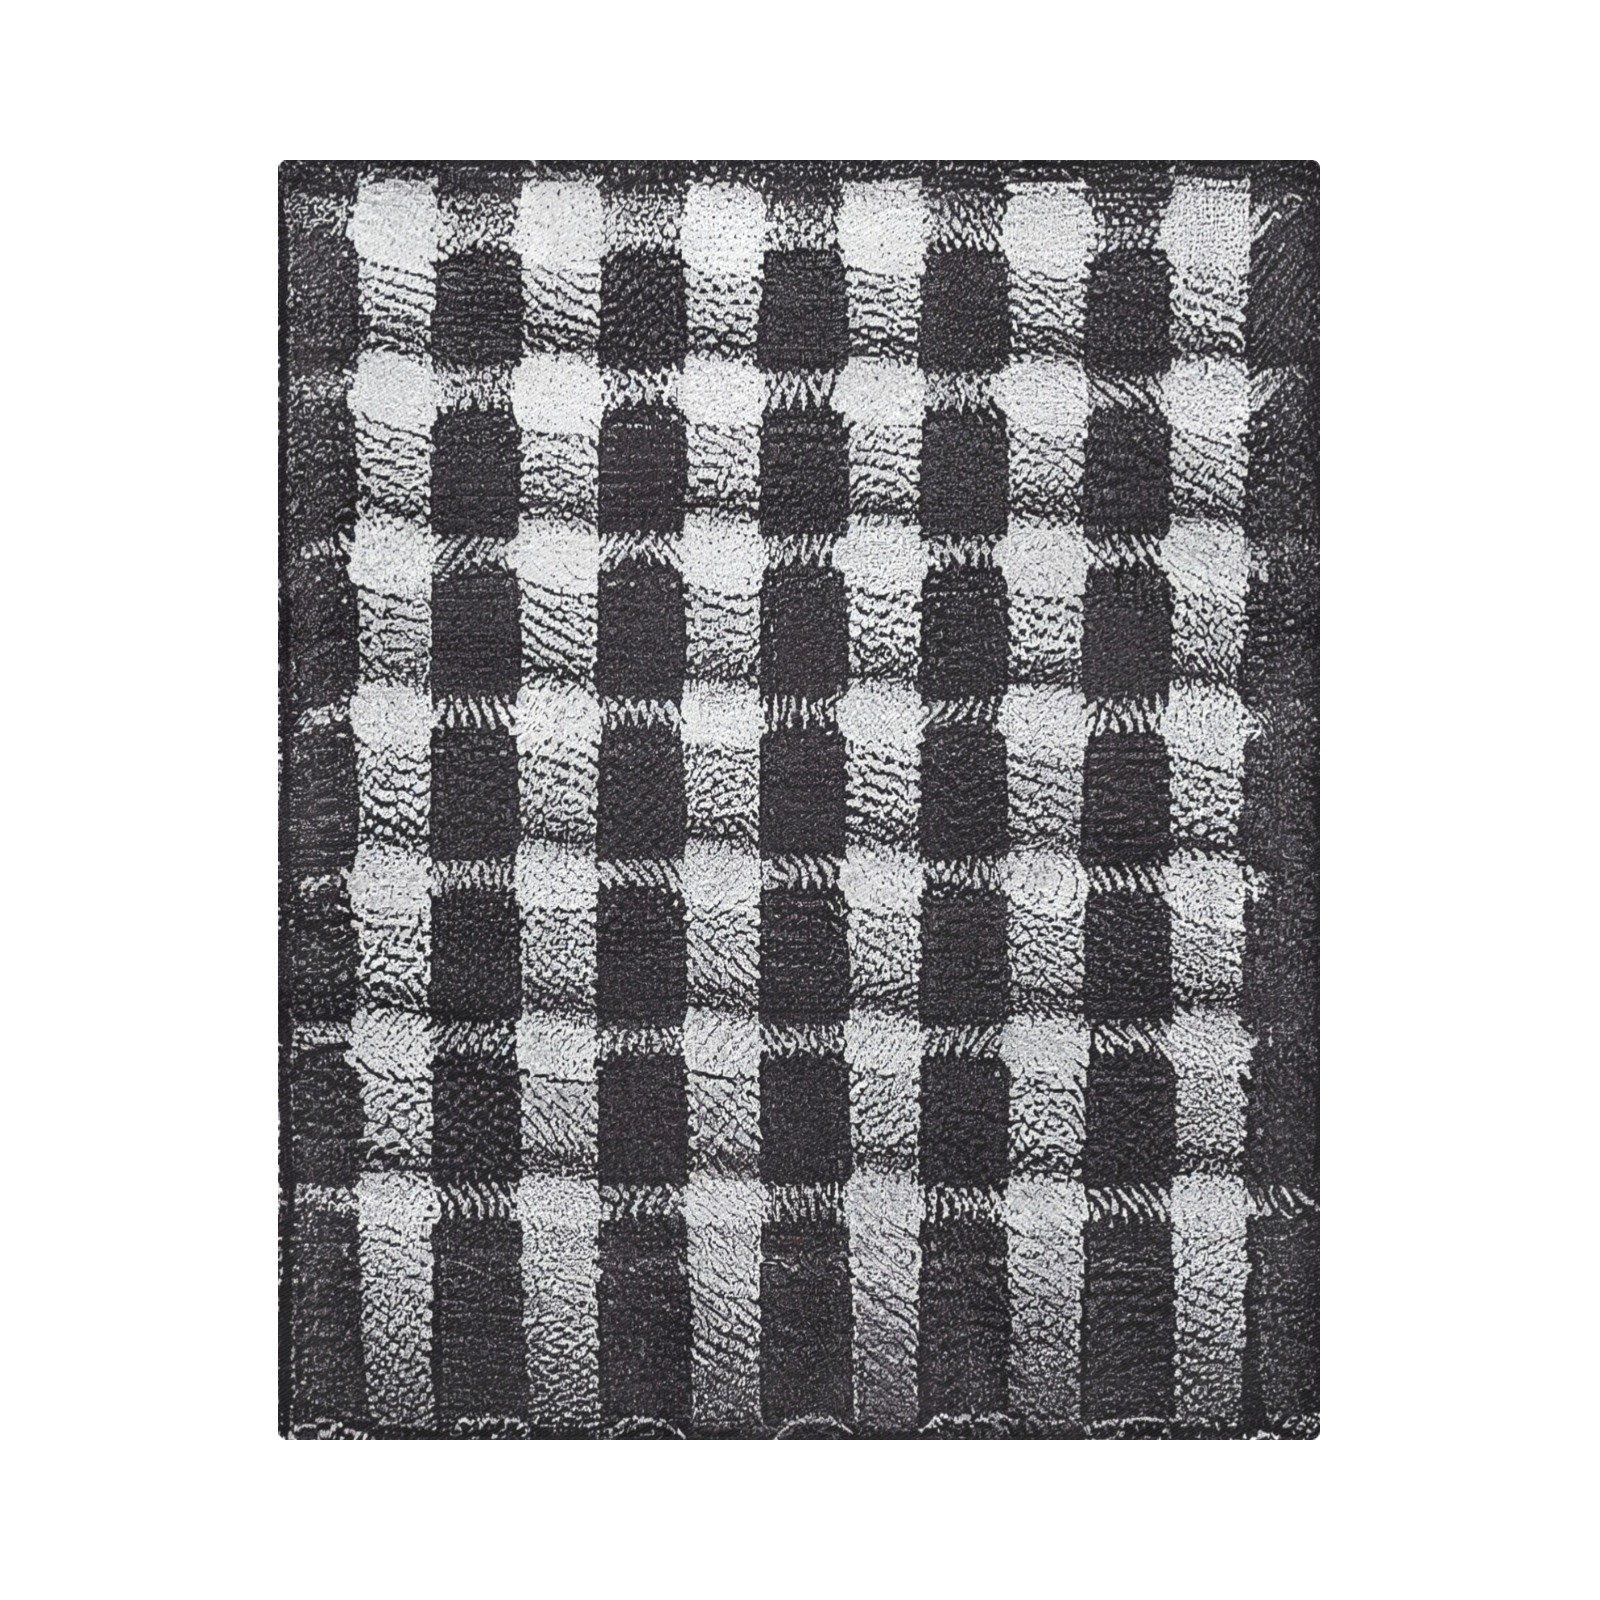 black and white check pattern 2 Duvet Cover 86"x70" ( All-over-print)